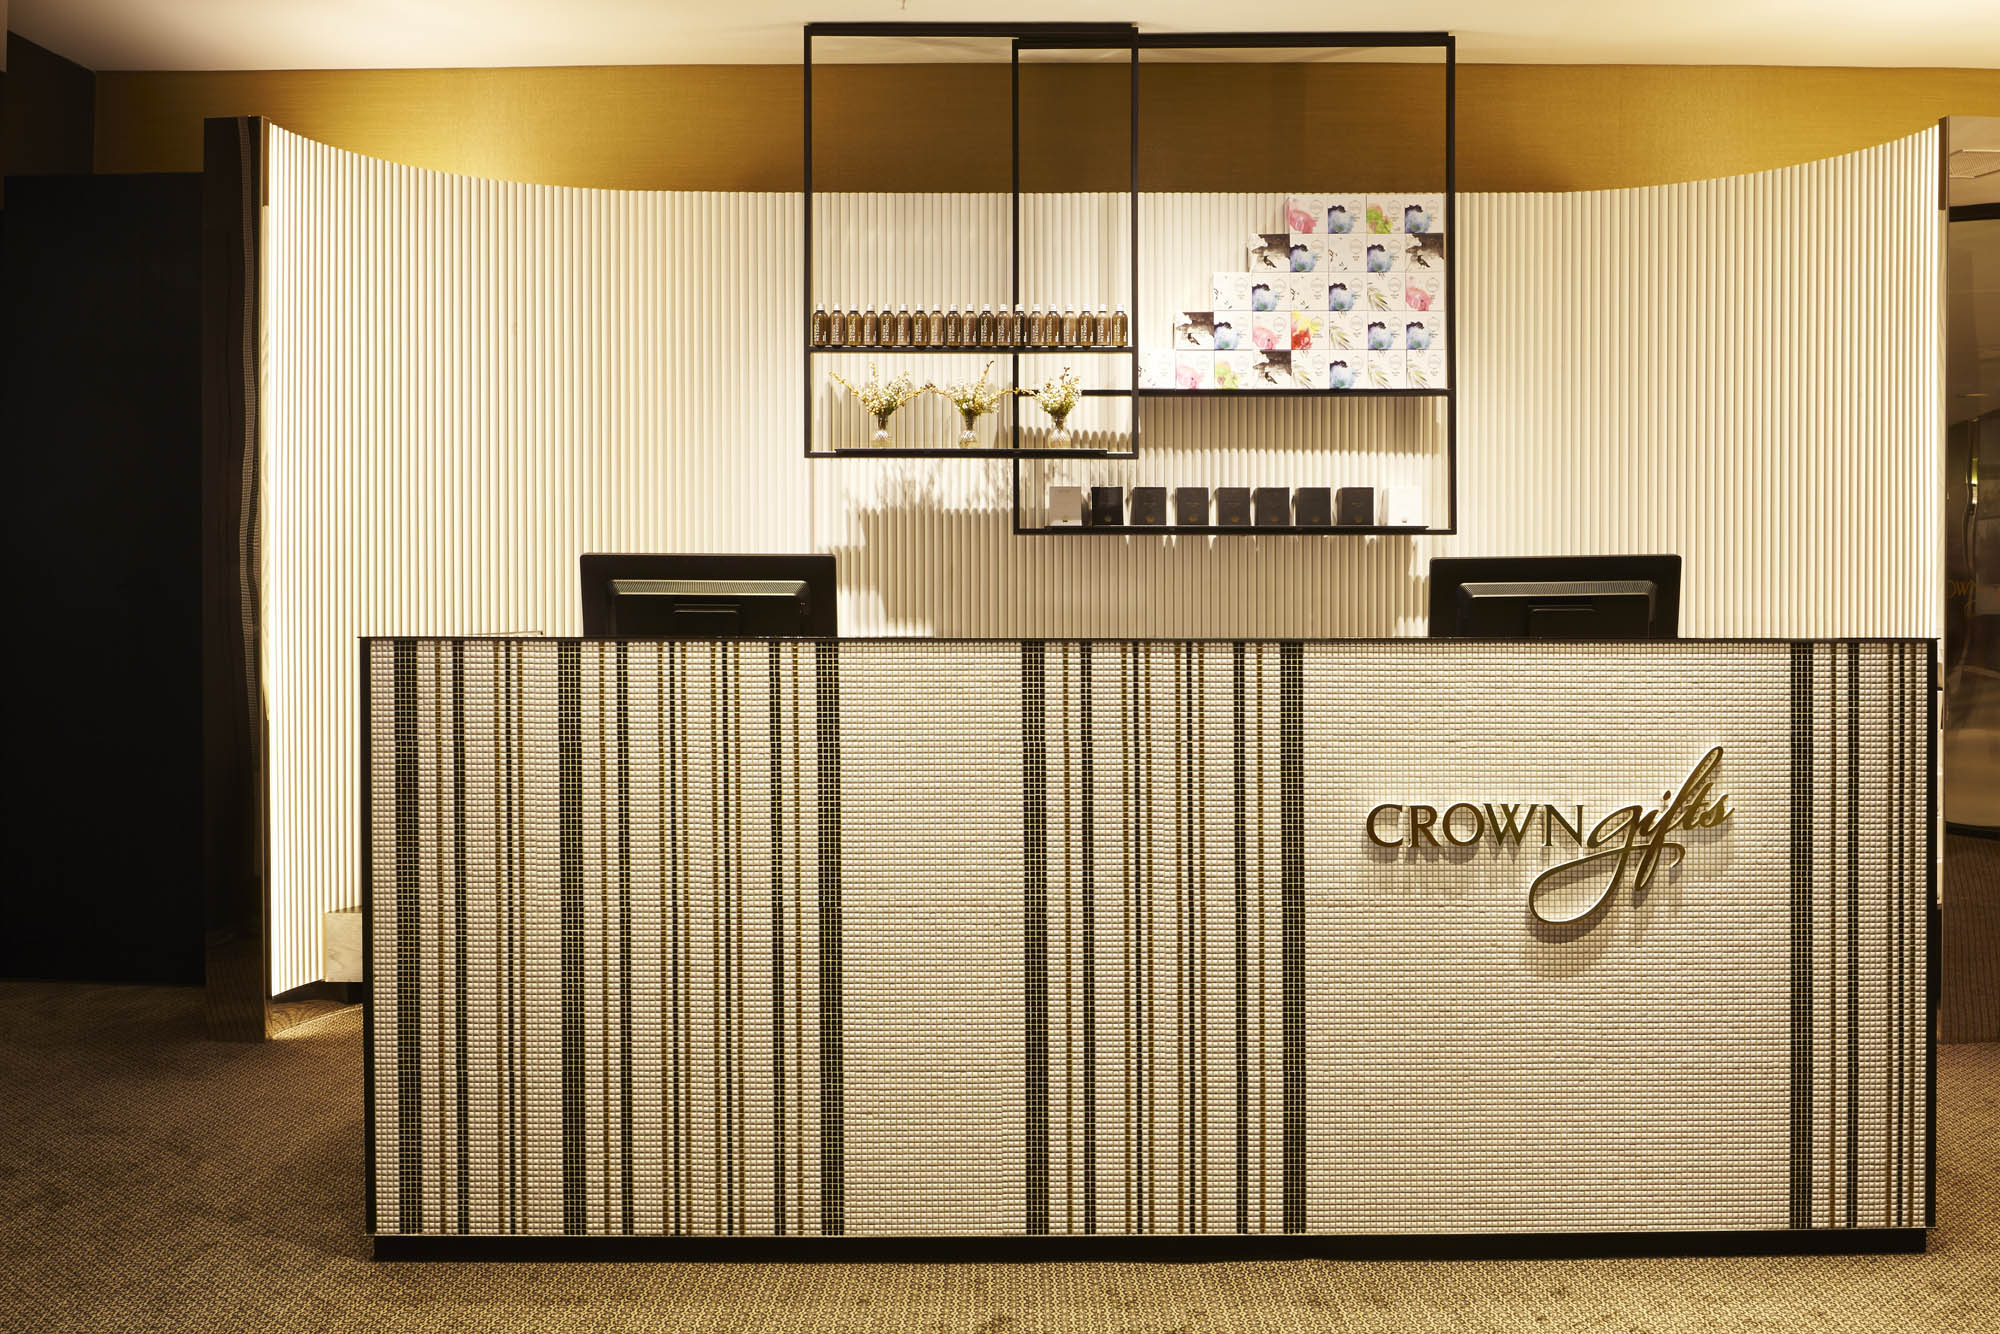 crown gifts melbourne fitout register counter